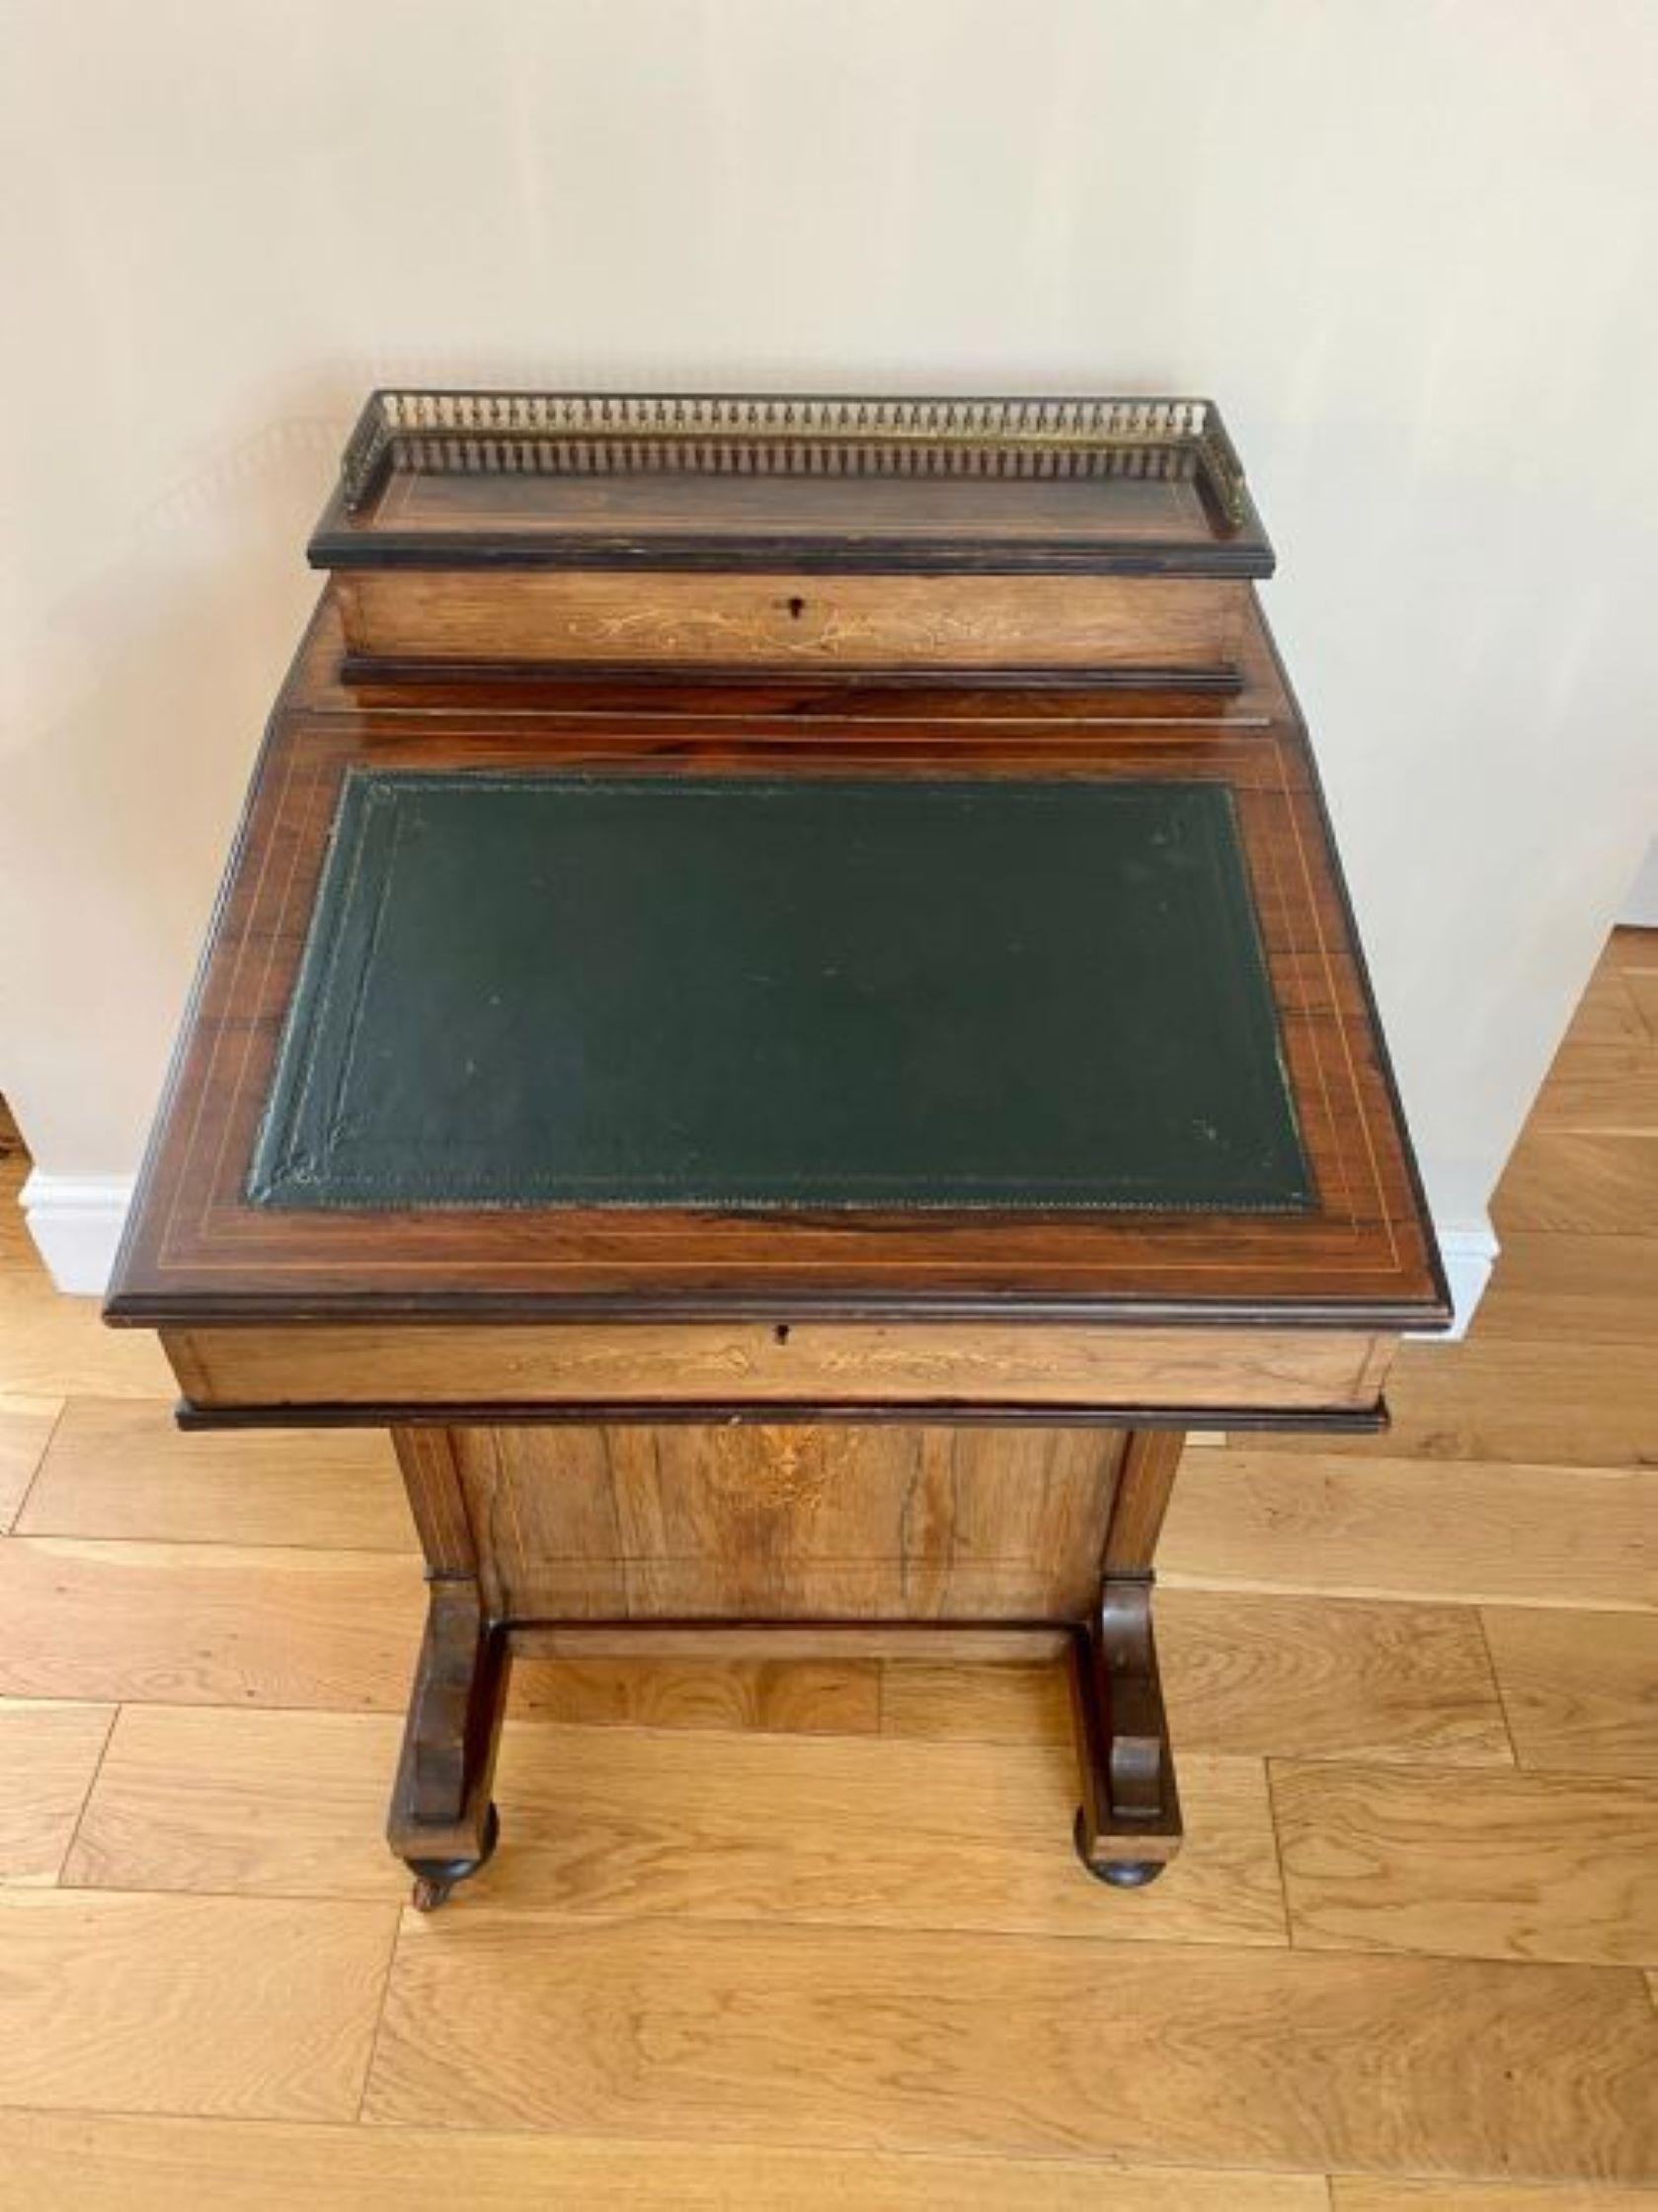 Antique Victorian Quality Inlaid Rosewood Freestanding Davenport Desk For Sale 3